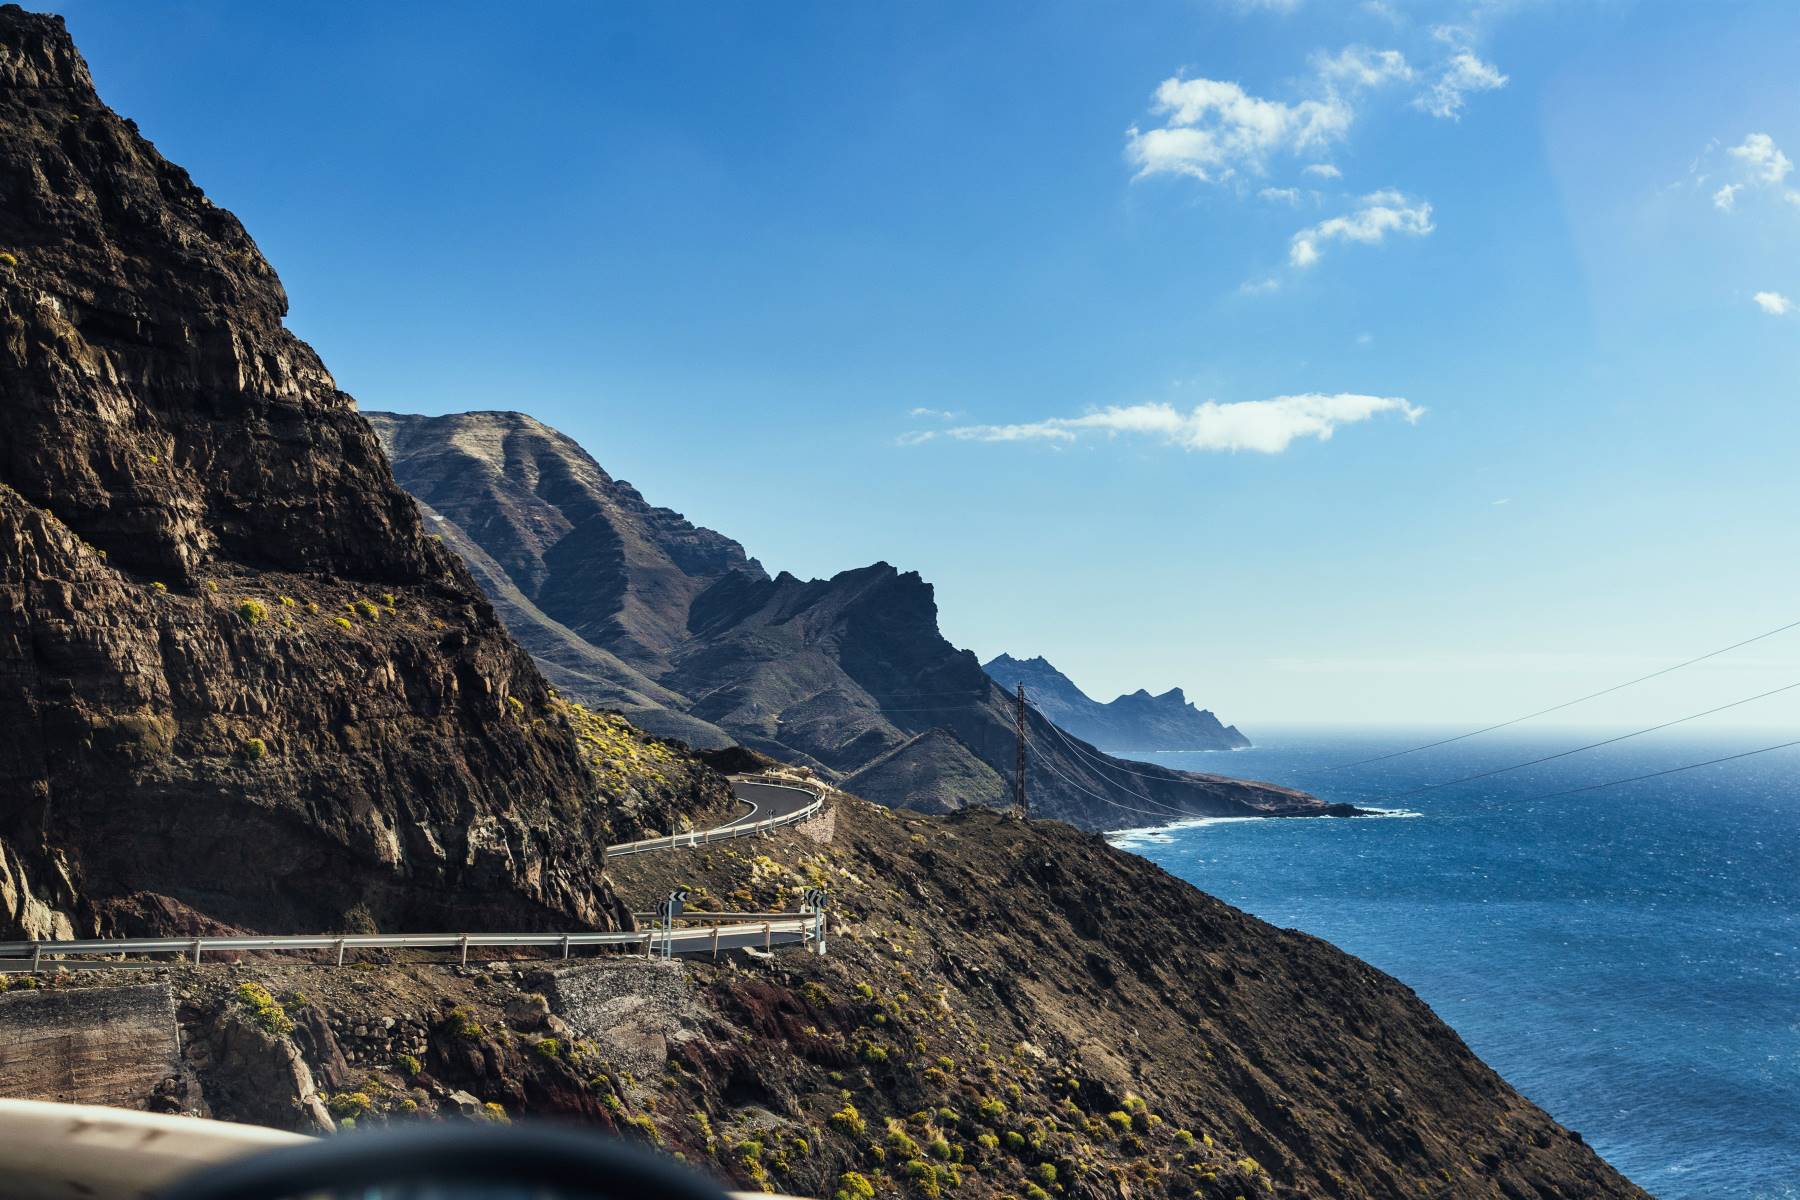 9 Very Best Things to Do in Gran Canaria - Endless Travel Destinations